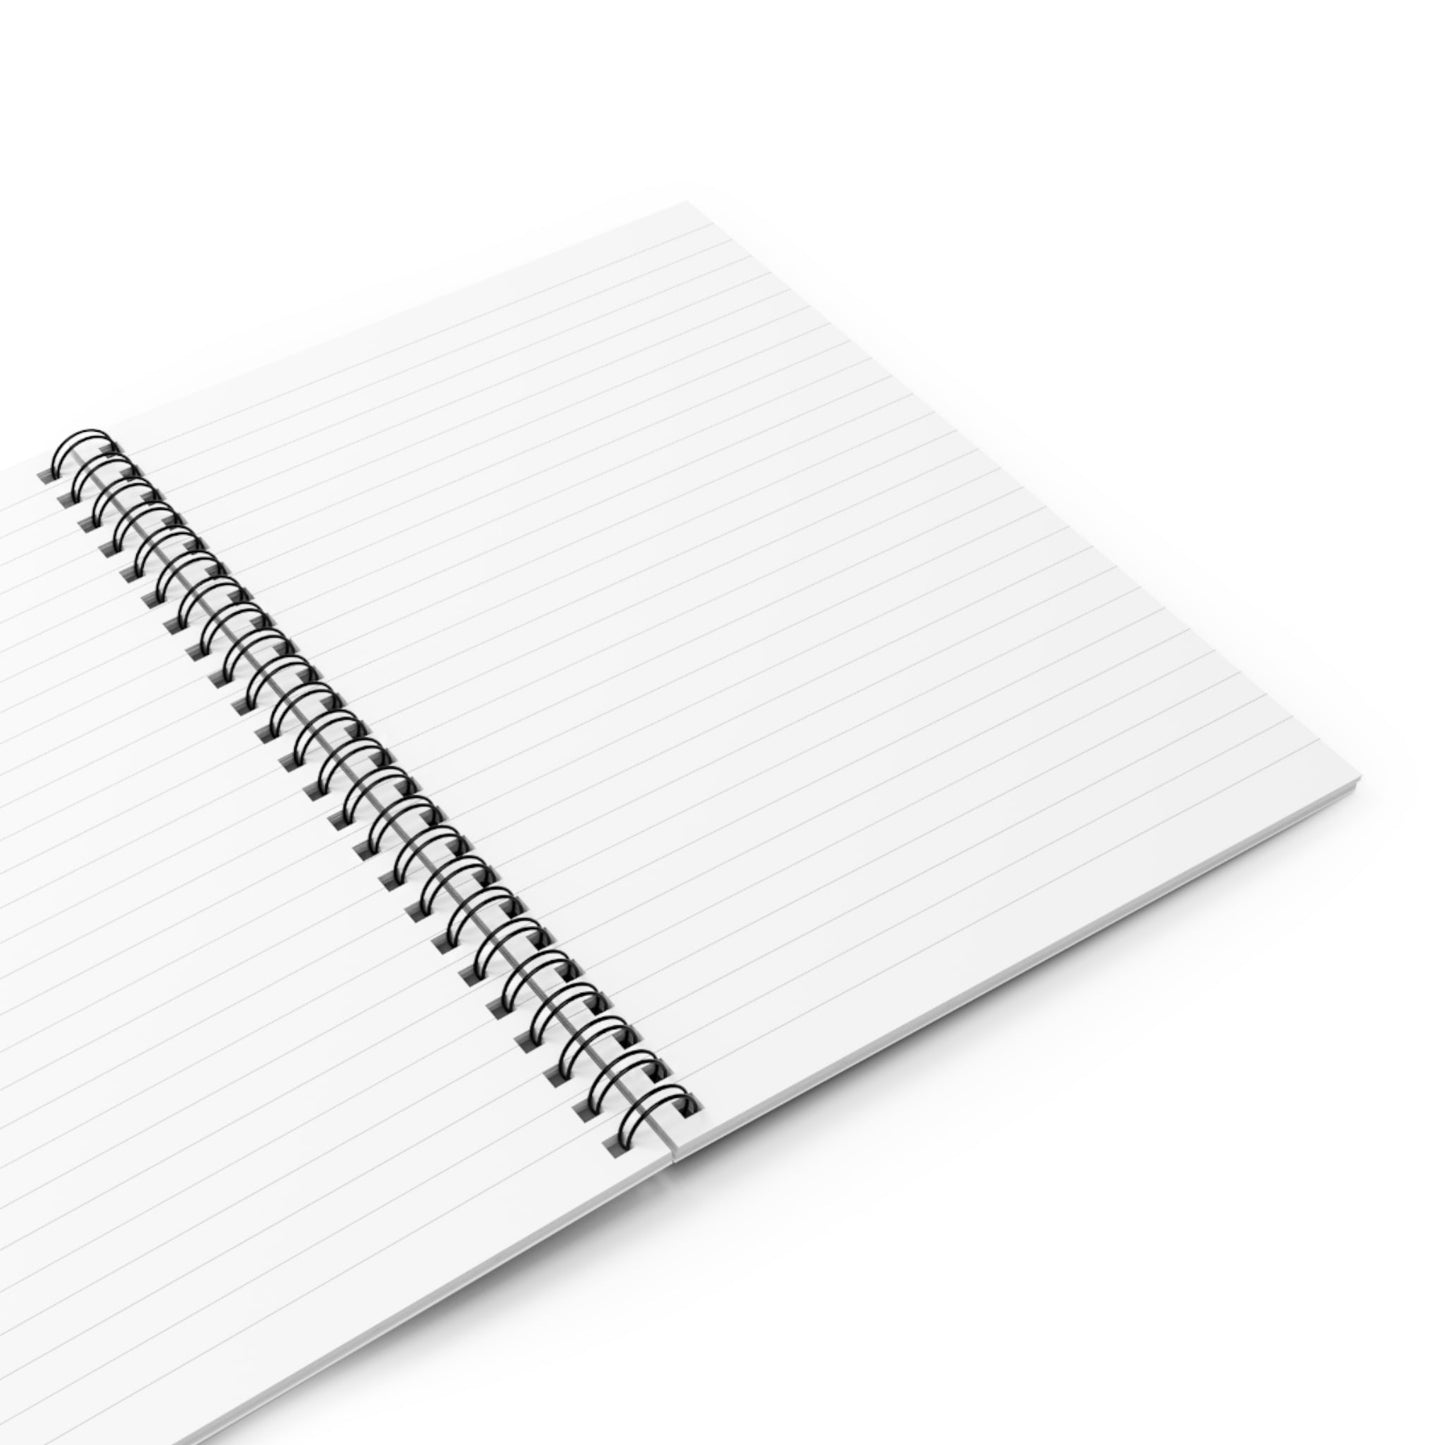 Spiral Notebook with Dark Female Portrait Cover Opened with Blank White College Ruled Pages